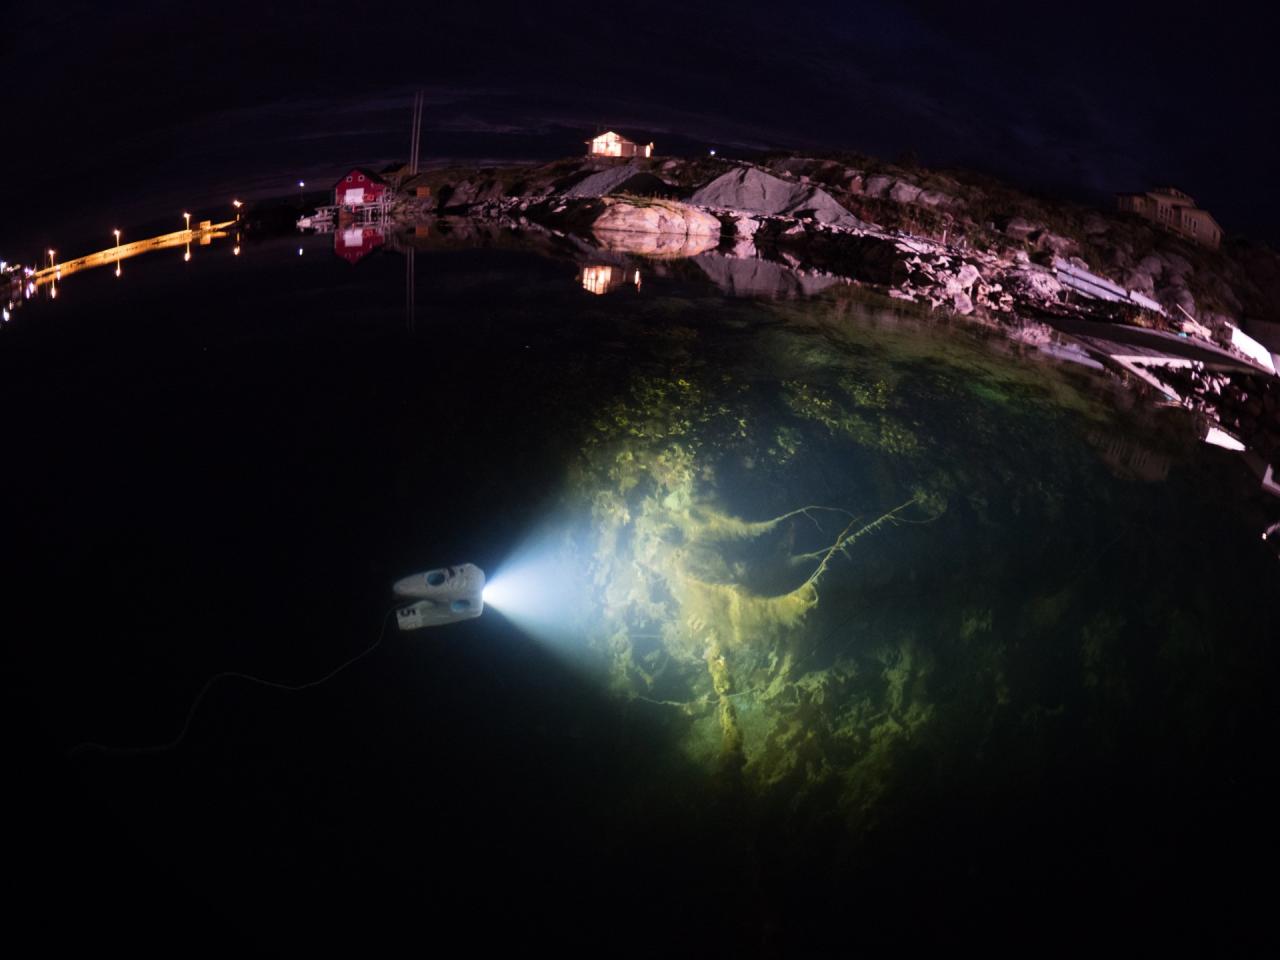 Night dive in the clear waters of Mausundvær